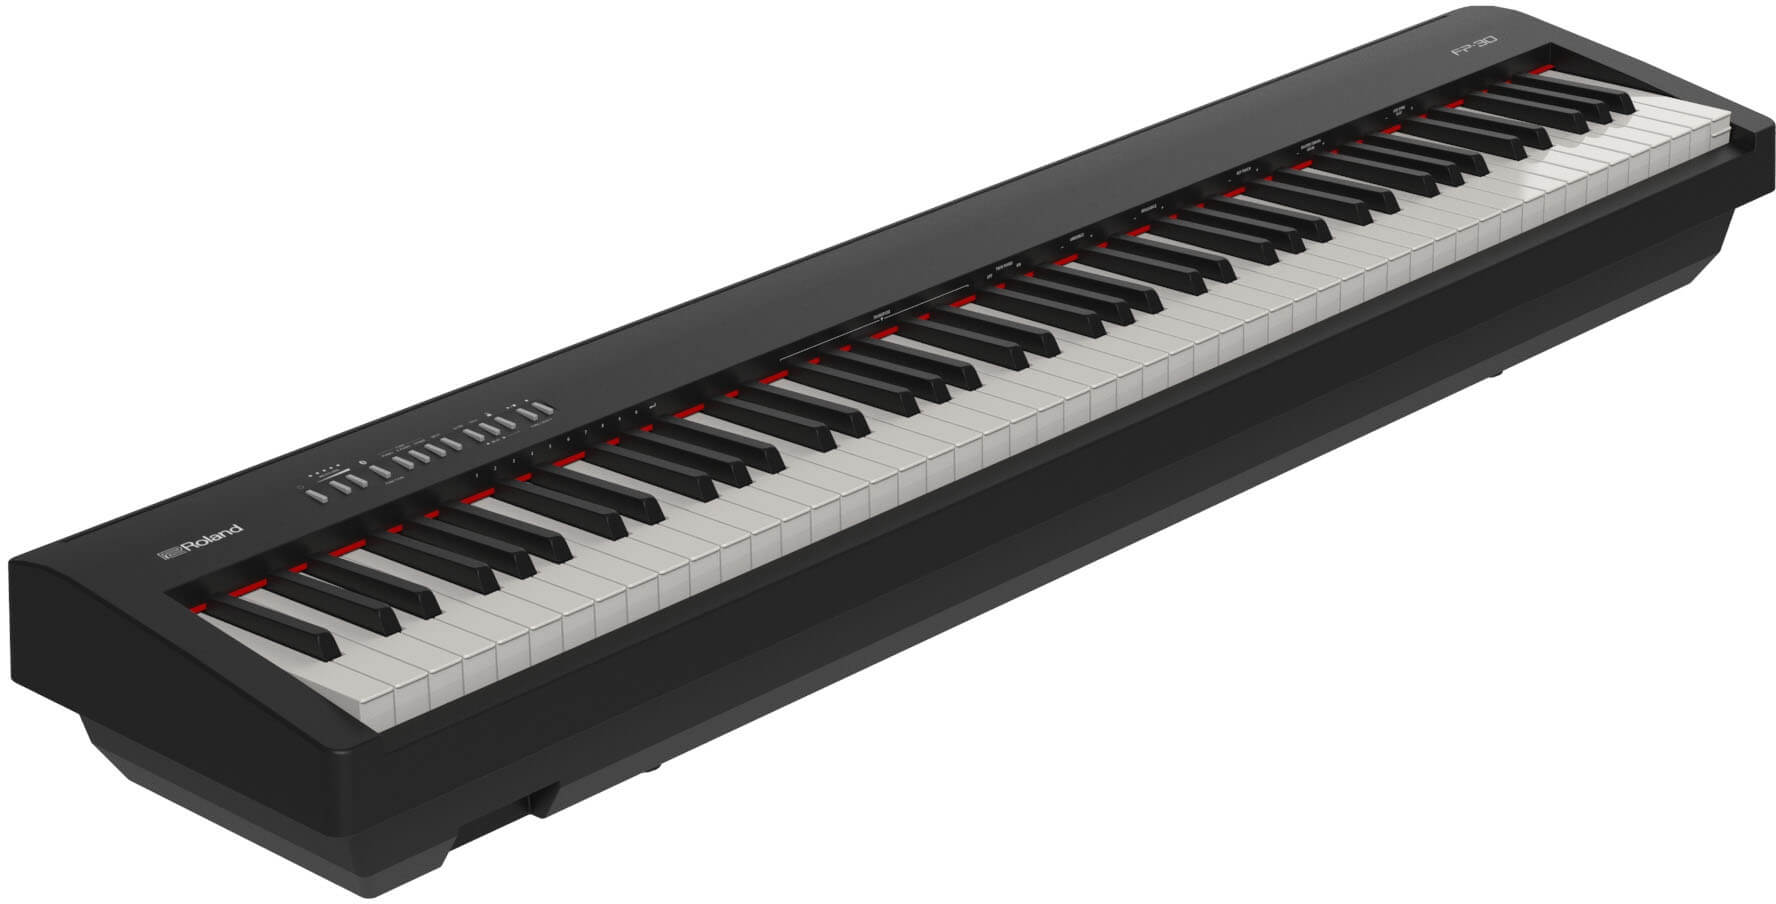  Roland FP-30X Digital Piano with Built-in Powerful